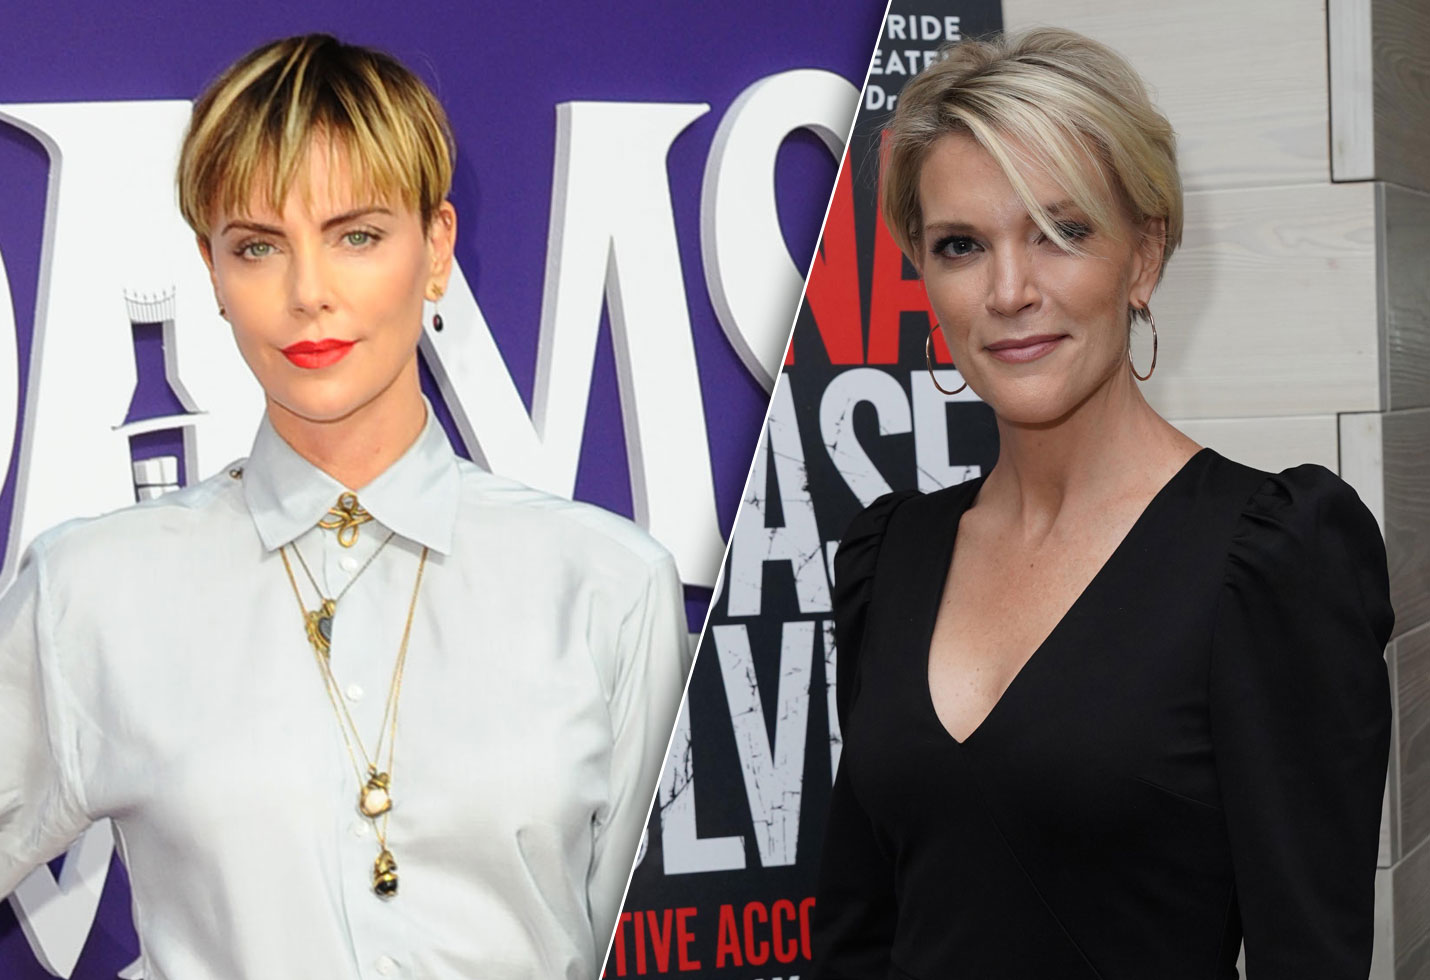 Charlize Theron Reacts To Megyn Kelly Praising Her ‘Bombshell’ Casting1430 x 980